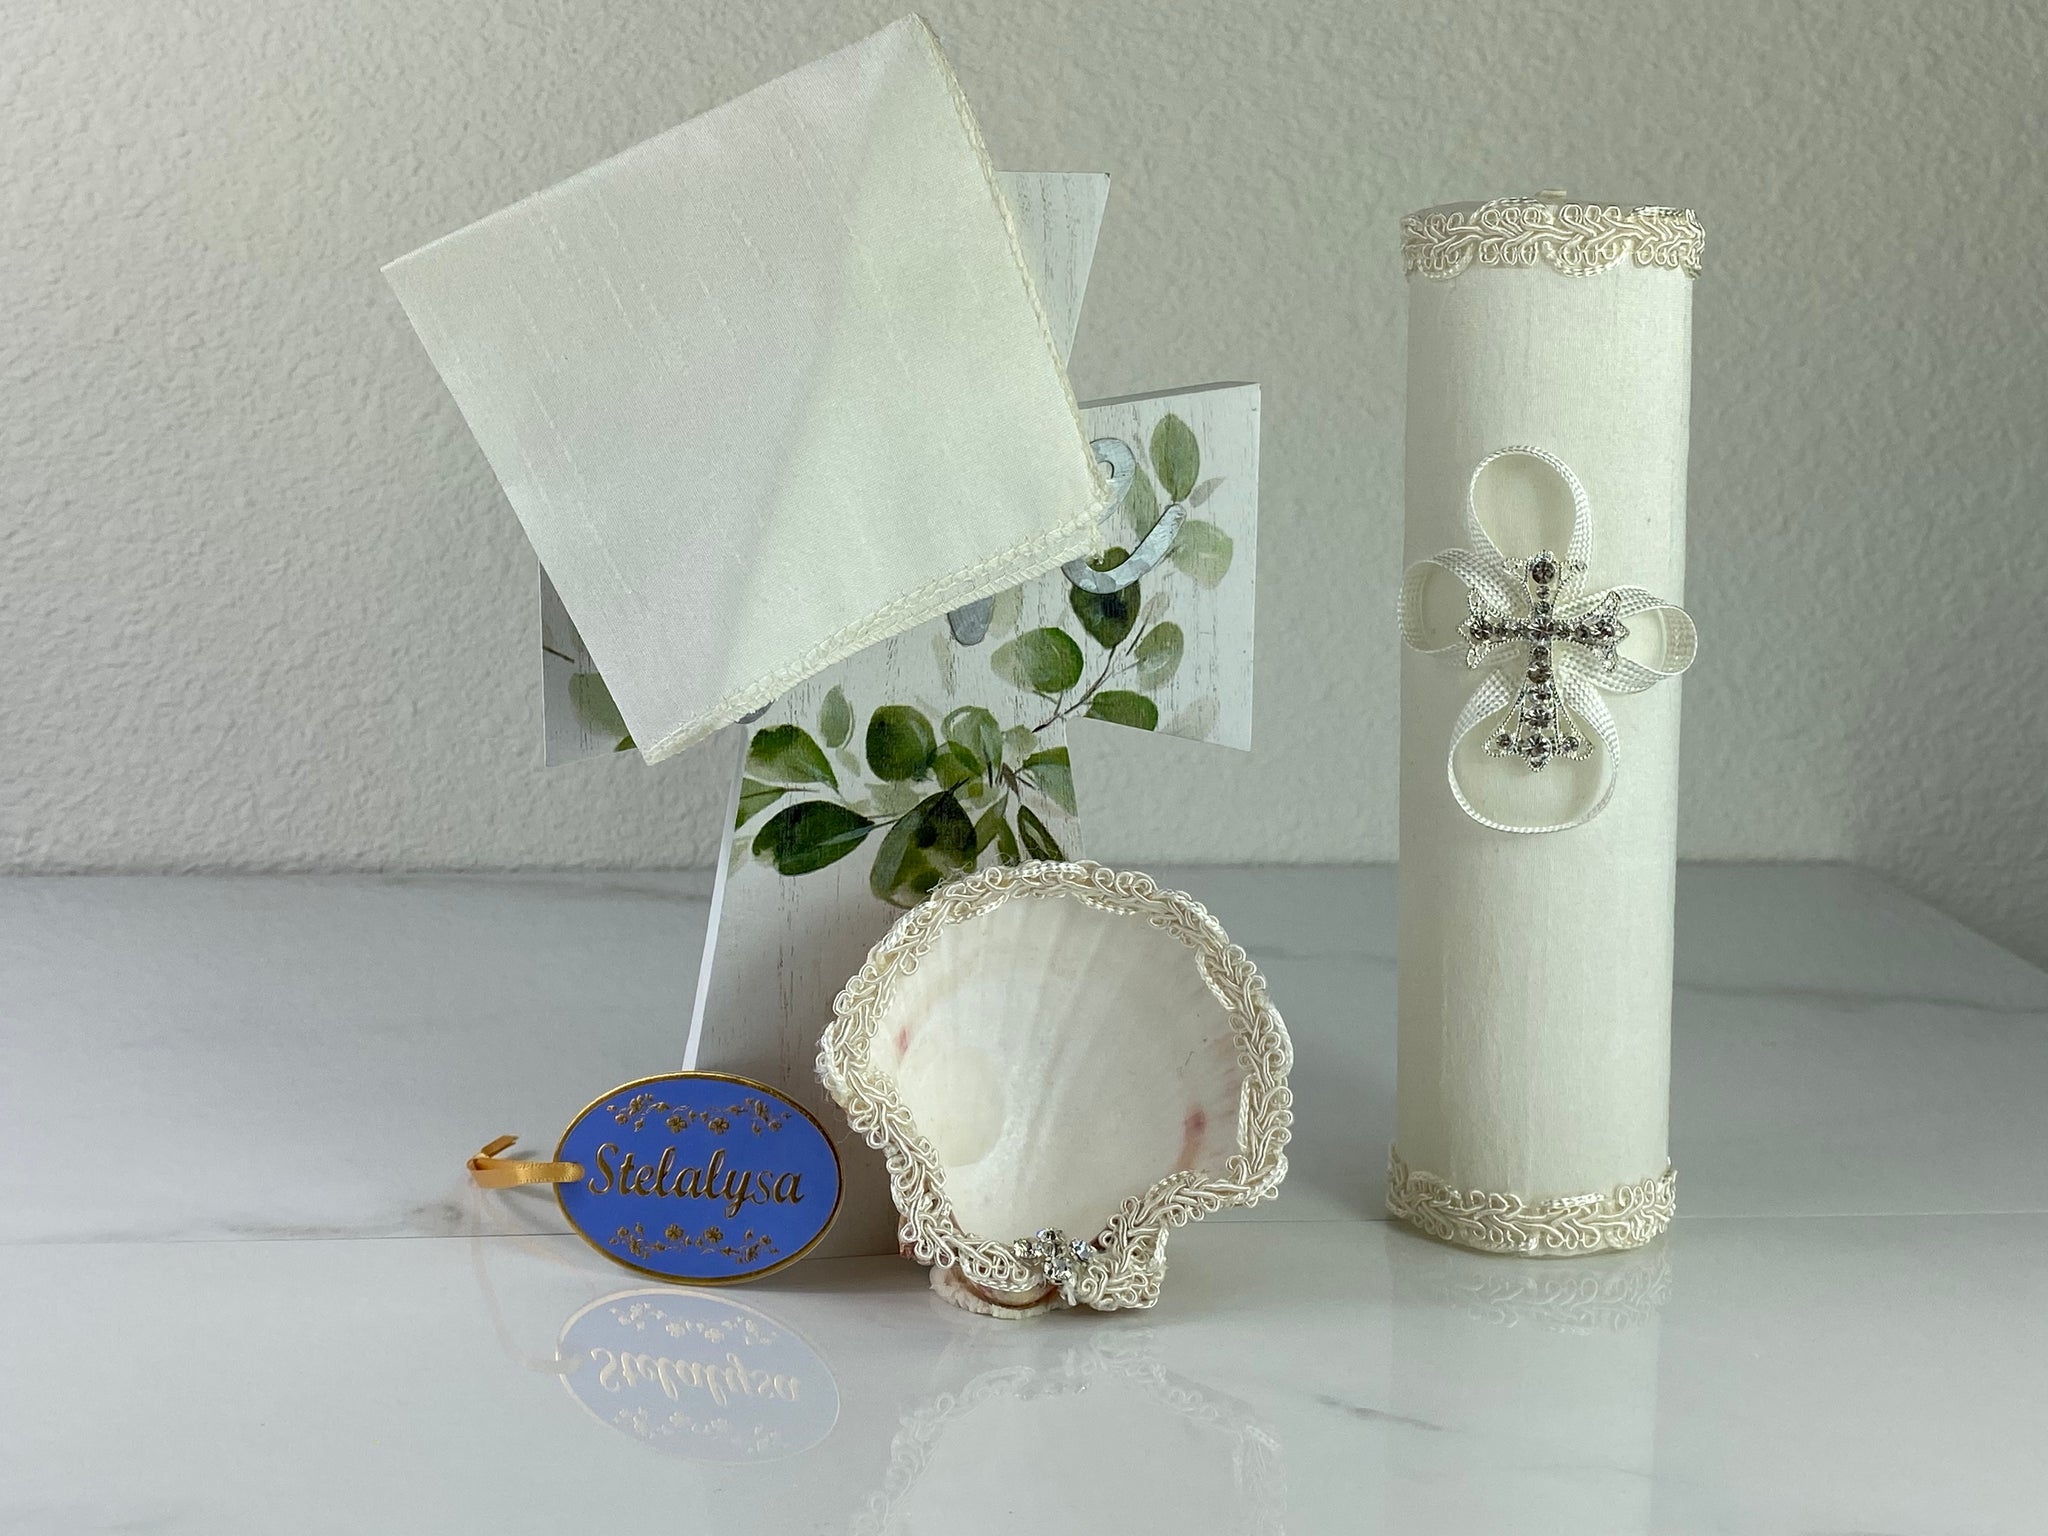 These one-of-a-kind Candle set is handmade and ivory in color.  This candle has a classic look.   It is uniquely decorated with lace and  cross made of crystals making it a gorgeous keepsake.   This candle is cylinder in shape and matches many outfits from the Boys' Baptism Collection.    To match, the Shell is put together piece by piece to compliment the Candle and Handkerchief.  The Handkerchief is made of satin to match the Shell and Candle beautifully.  